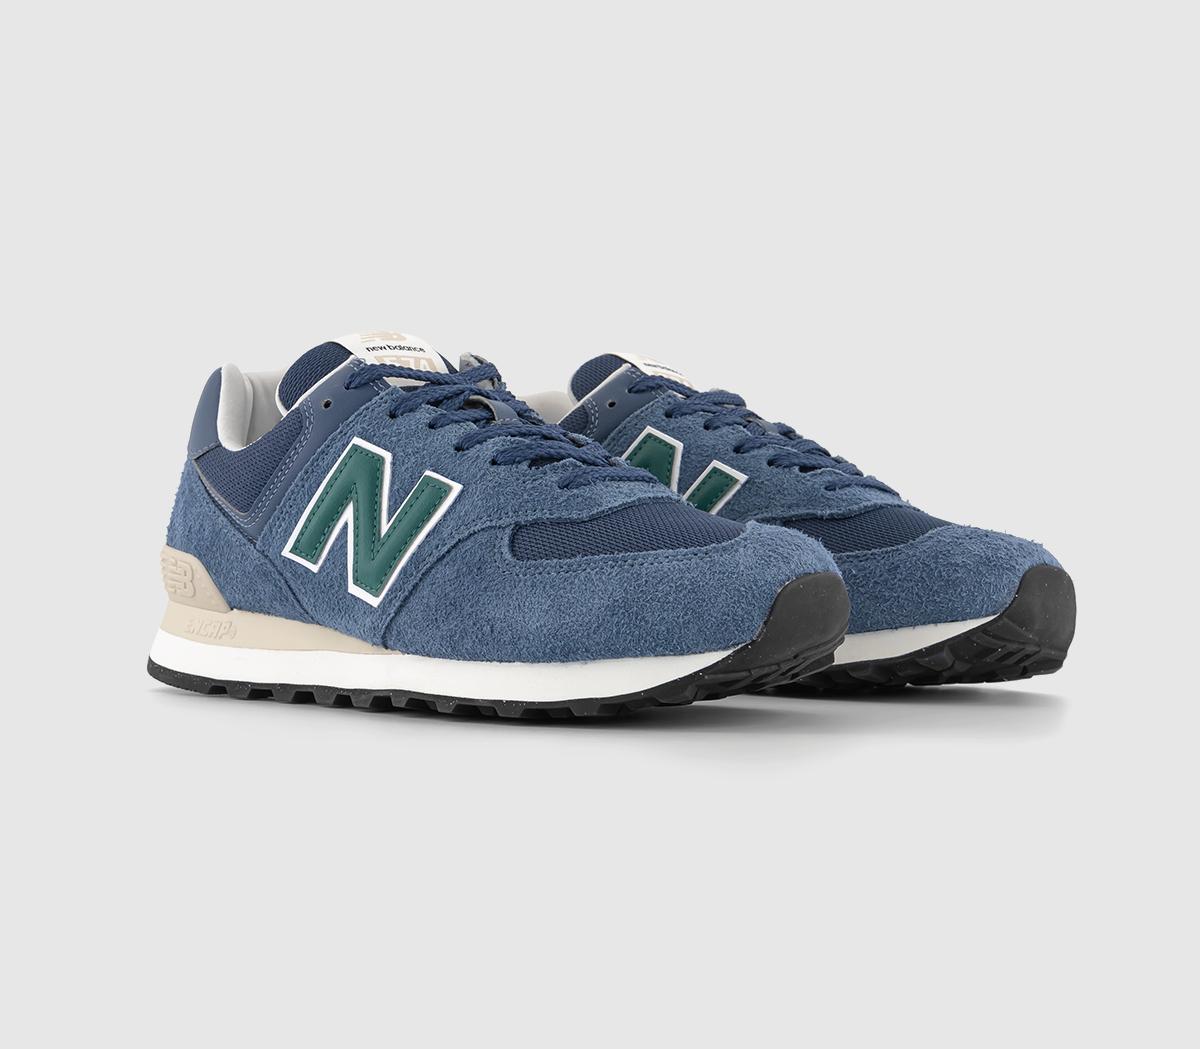 New Balance 574 Trainers Blue Navy Green - Men's Trainers